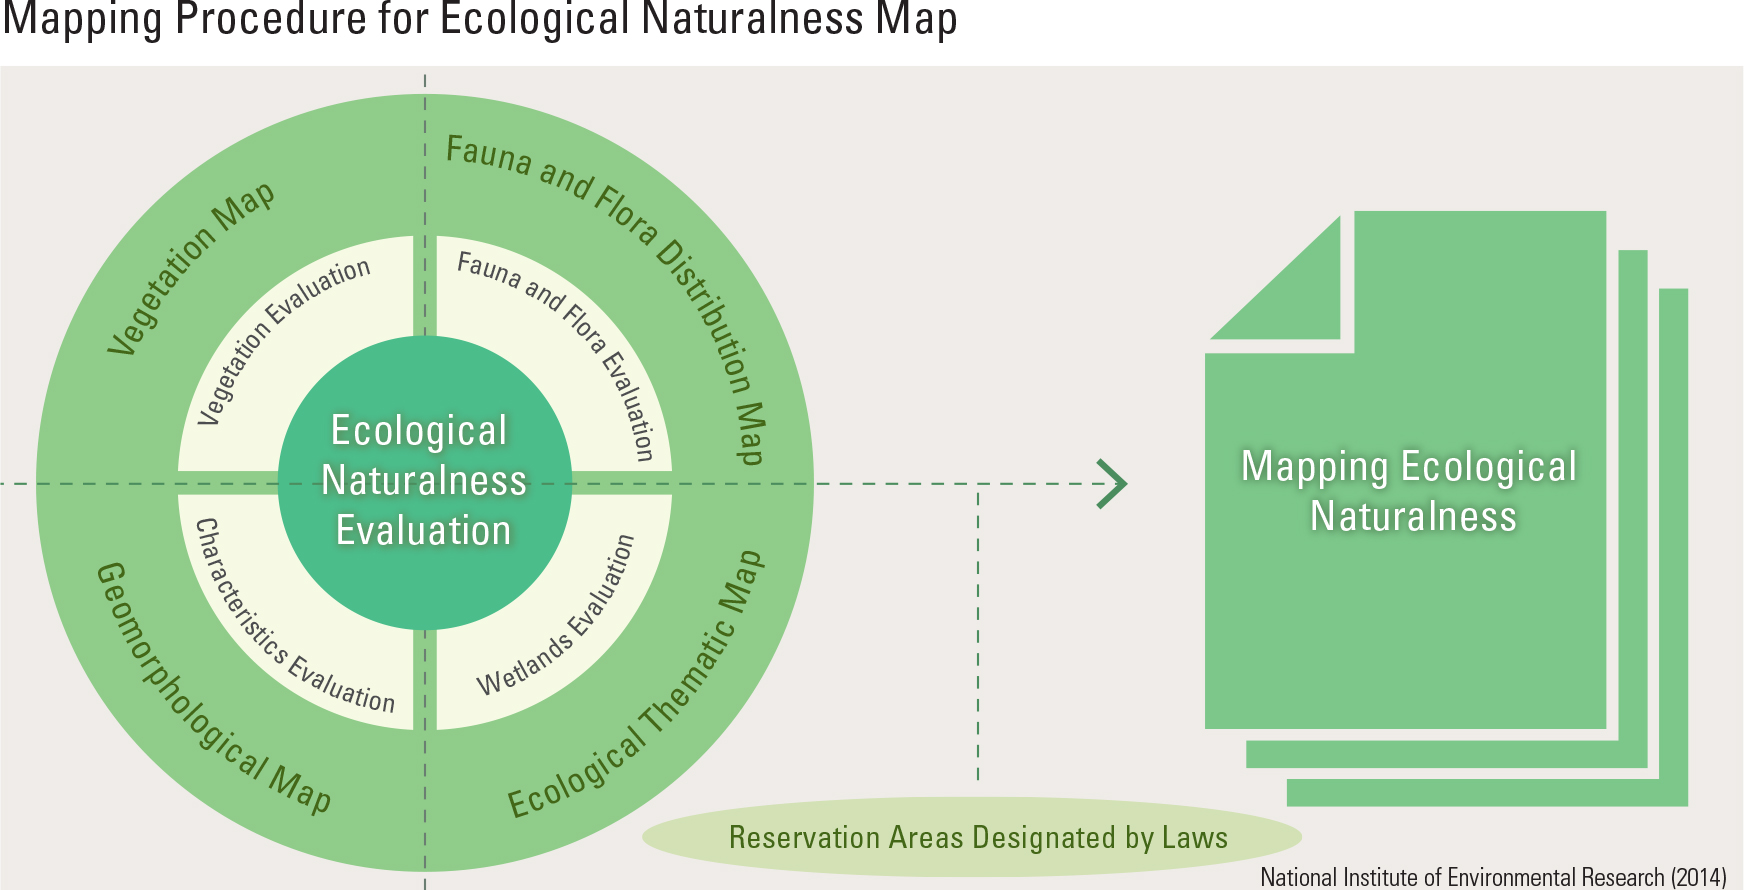 Mapping Procedure for Ecological Naturalness Map